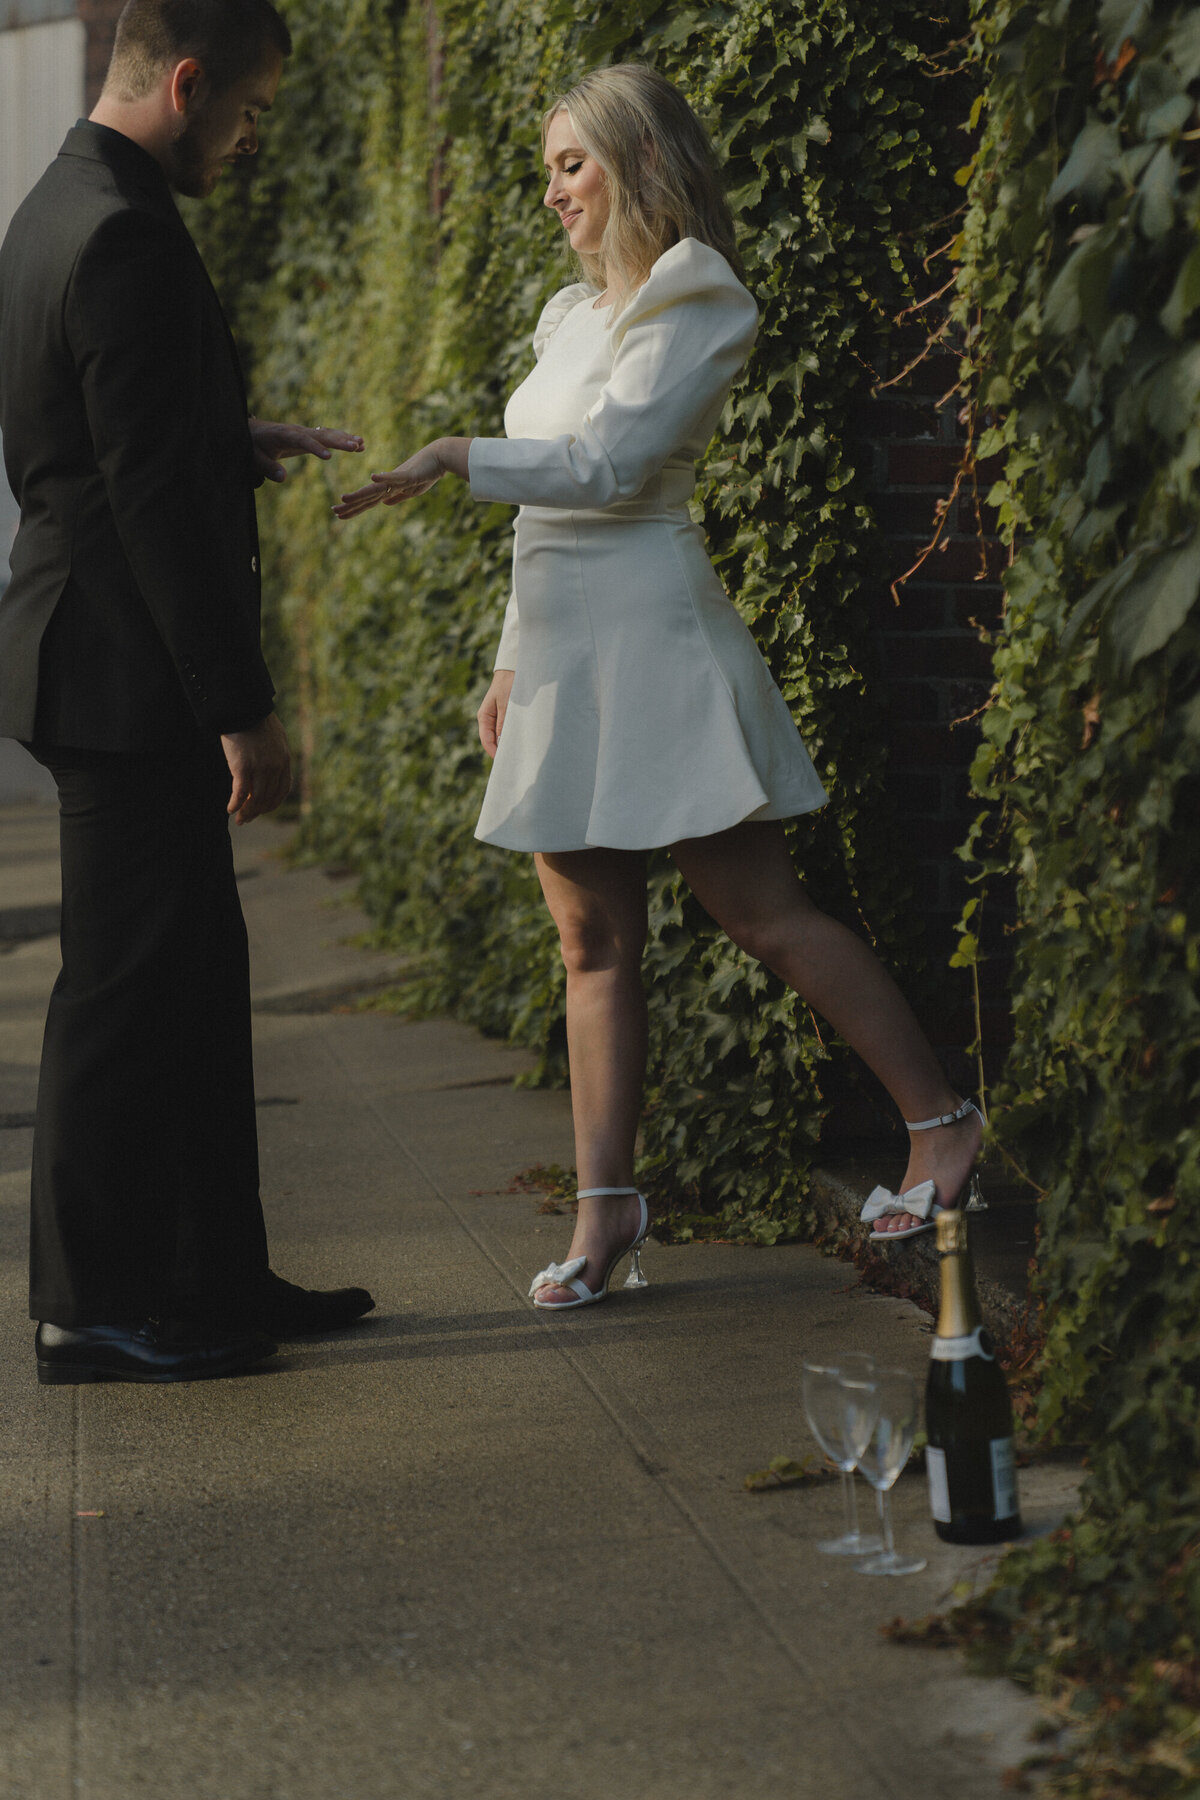 Sara-Canon-Elopement-Downtown-Seattle-WA-Amy-Law-Photography-50